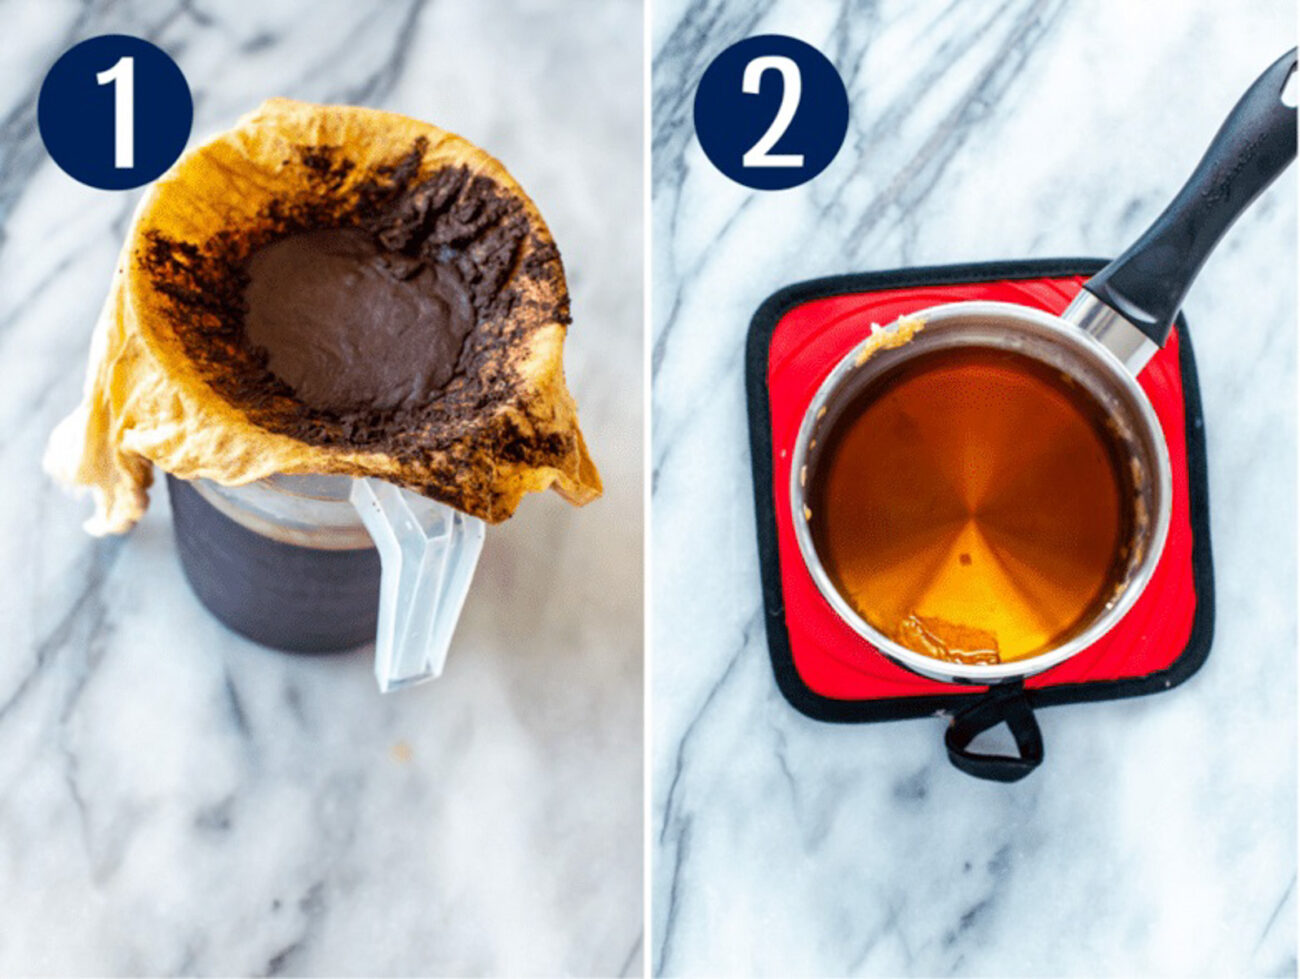 Steps 1 and 2 for making salted caramel cream cold brew: Make cold brew then make caramel syrup.